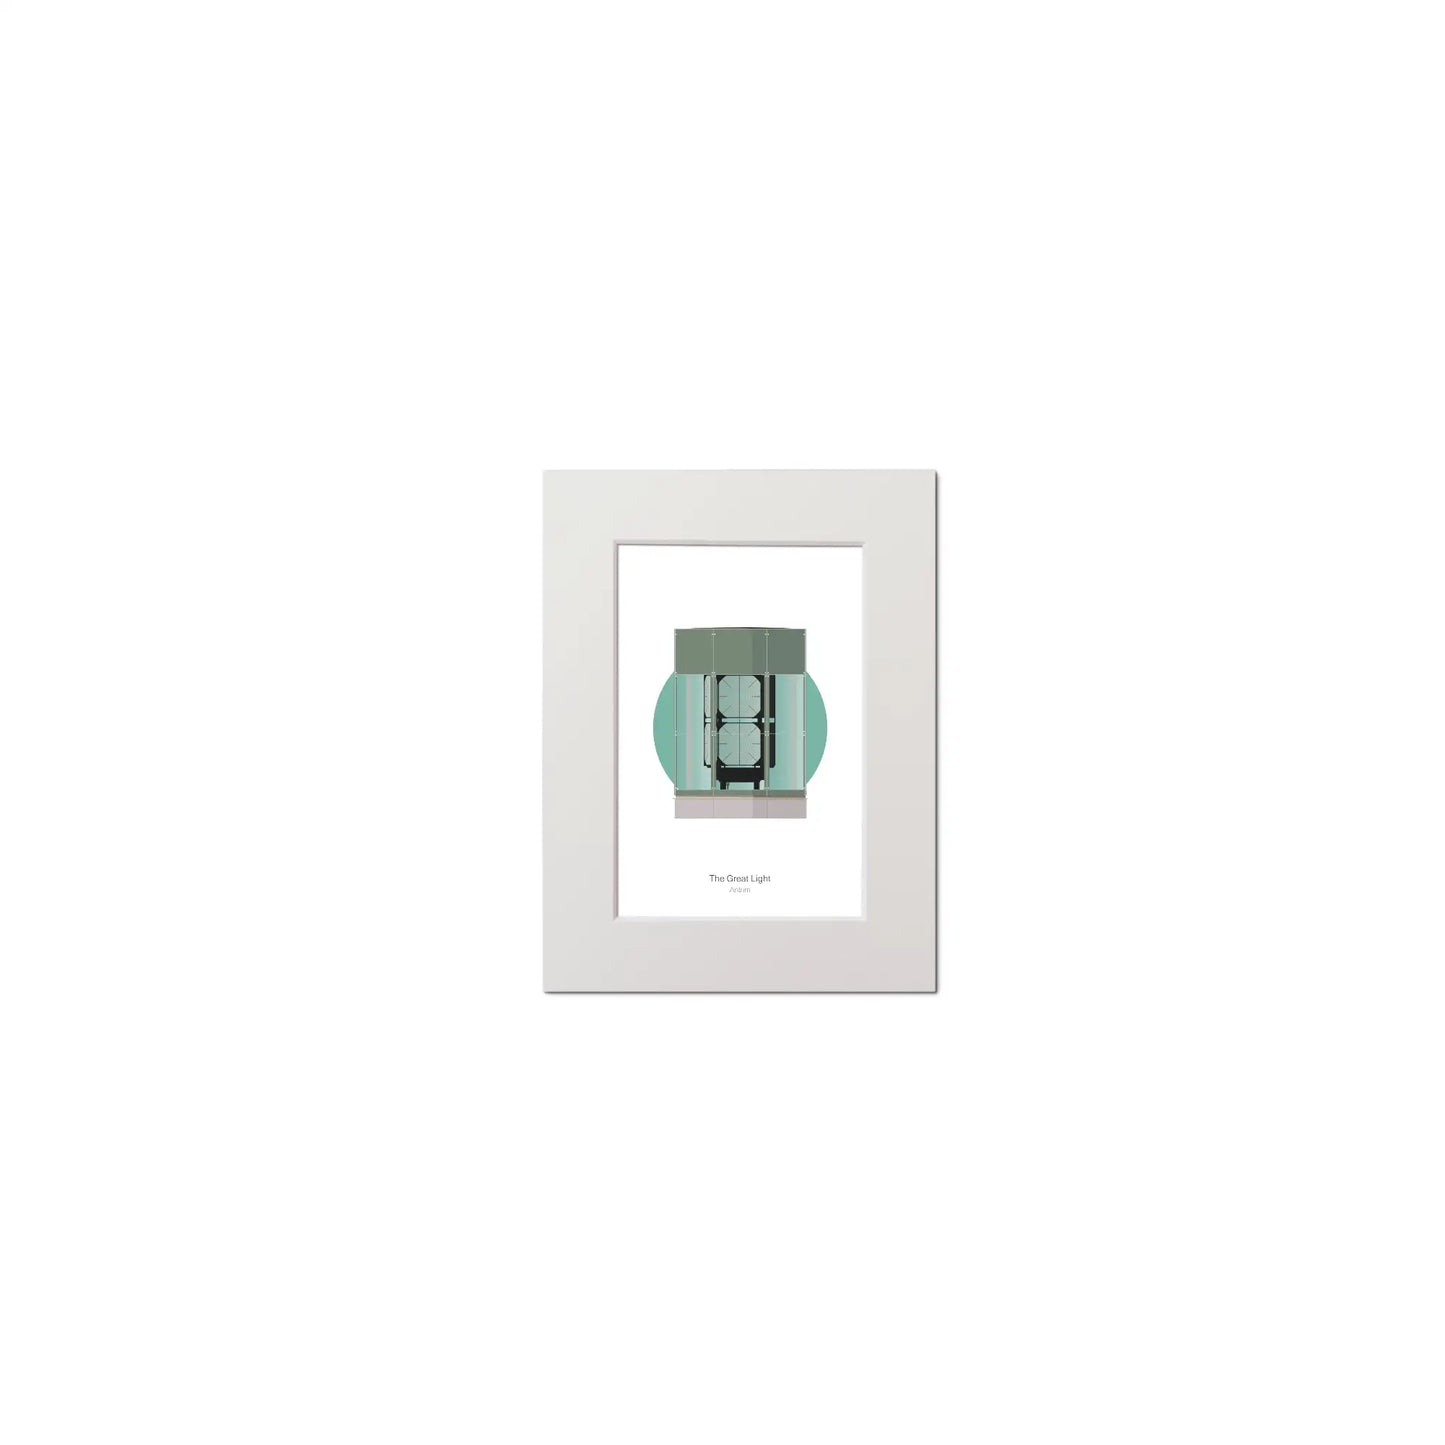 Contemporary graphic illustration of The Great Light lighthouse on a white background inside light blue square, mounted and measuring 15x20cm.